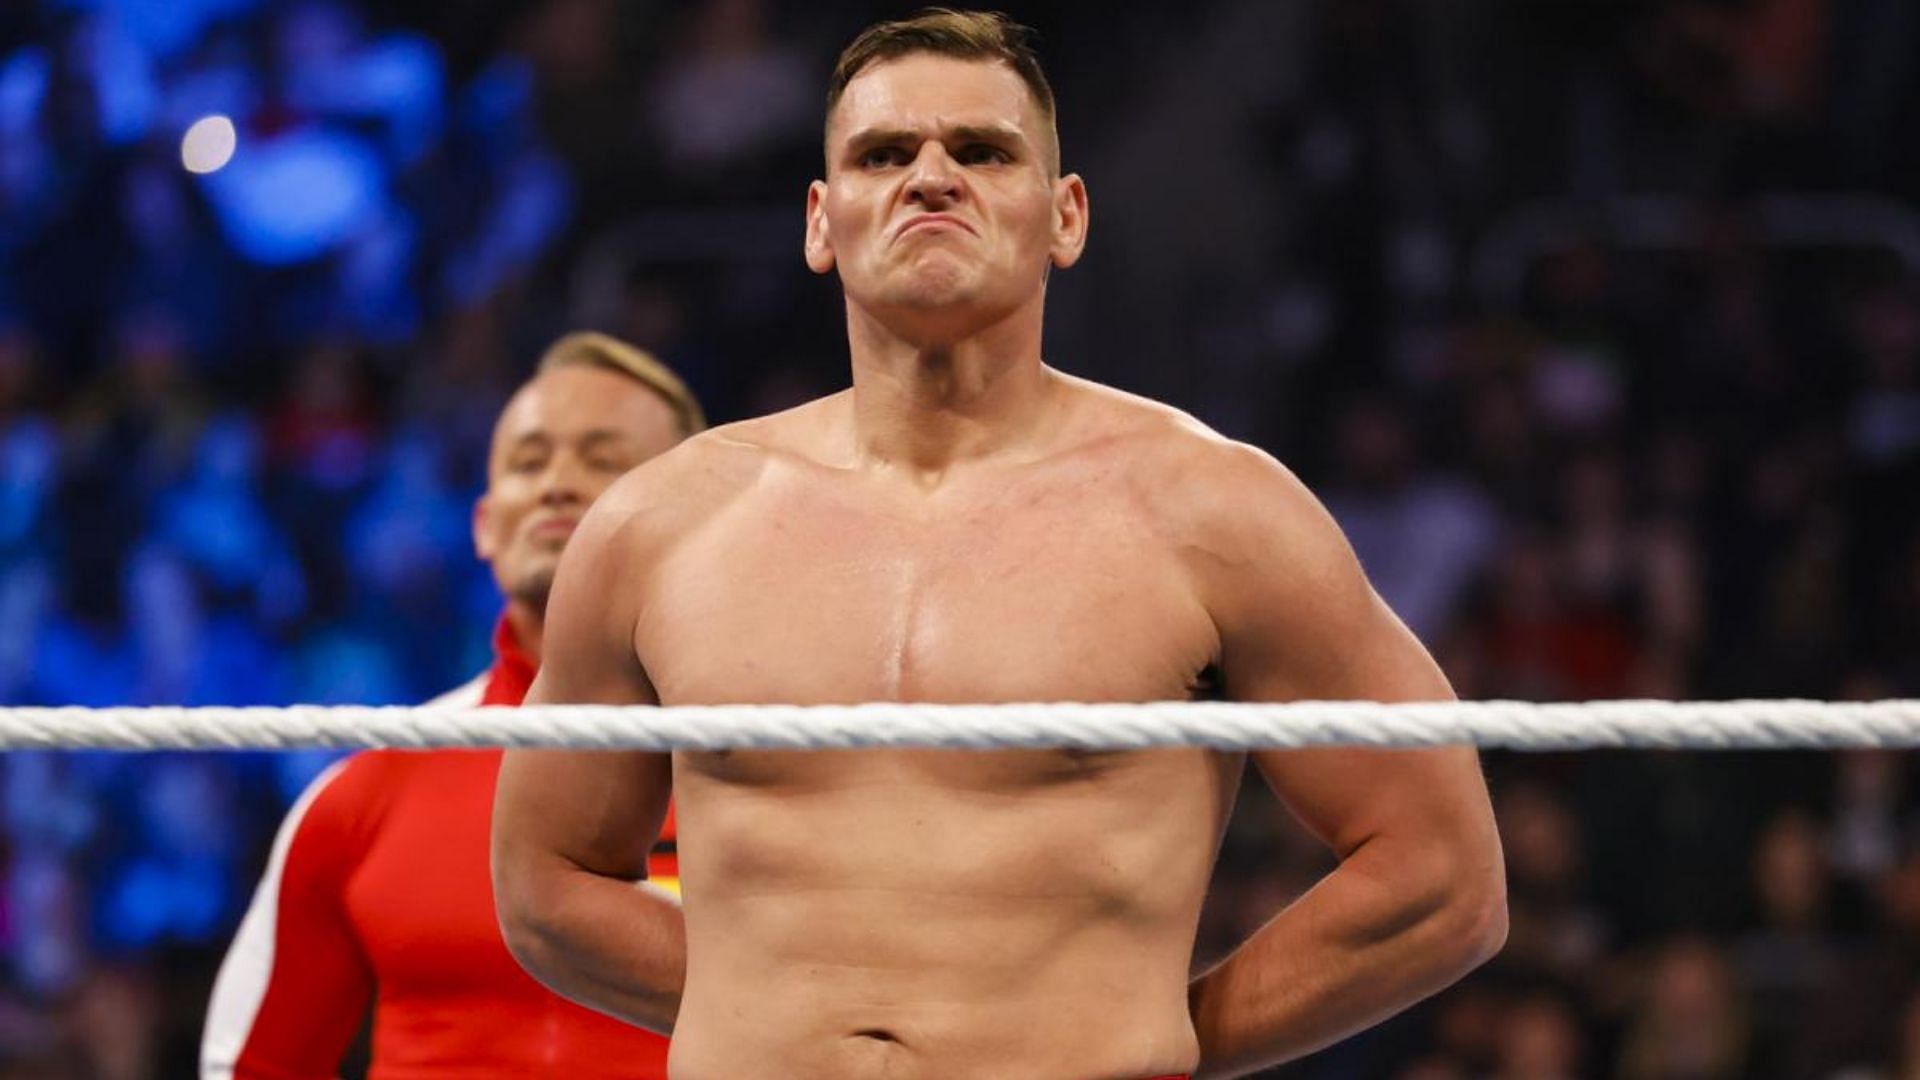 The Austrian superstar recently made his SmackDown debut.